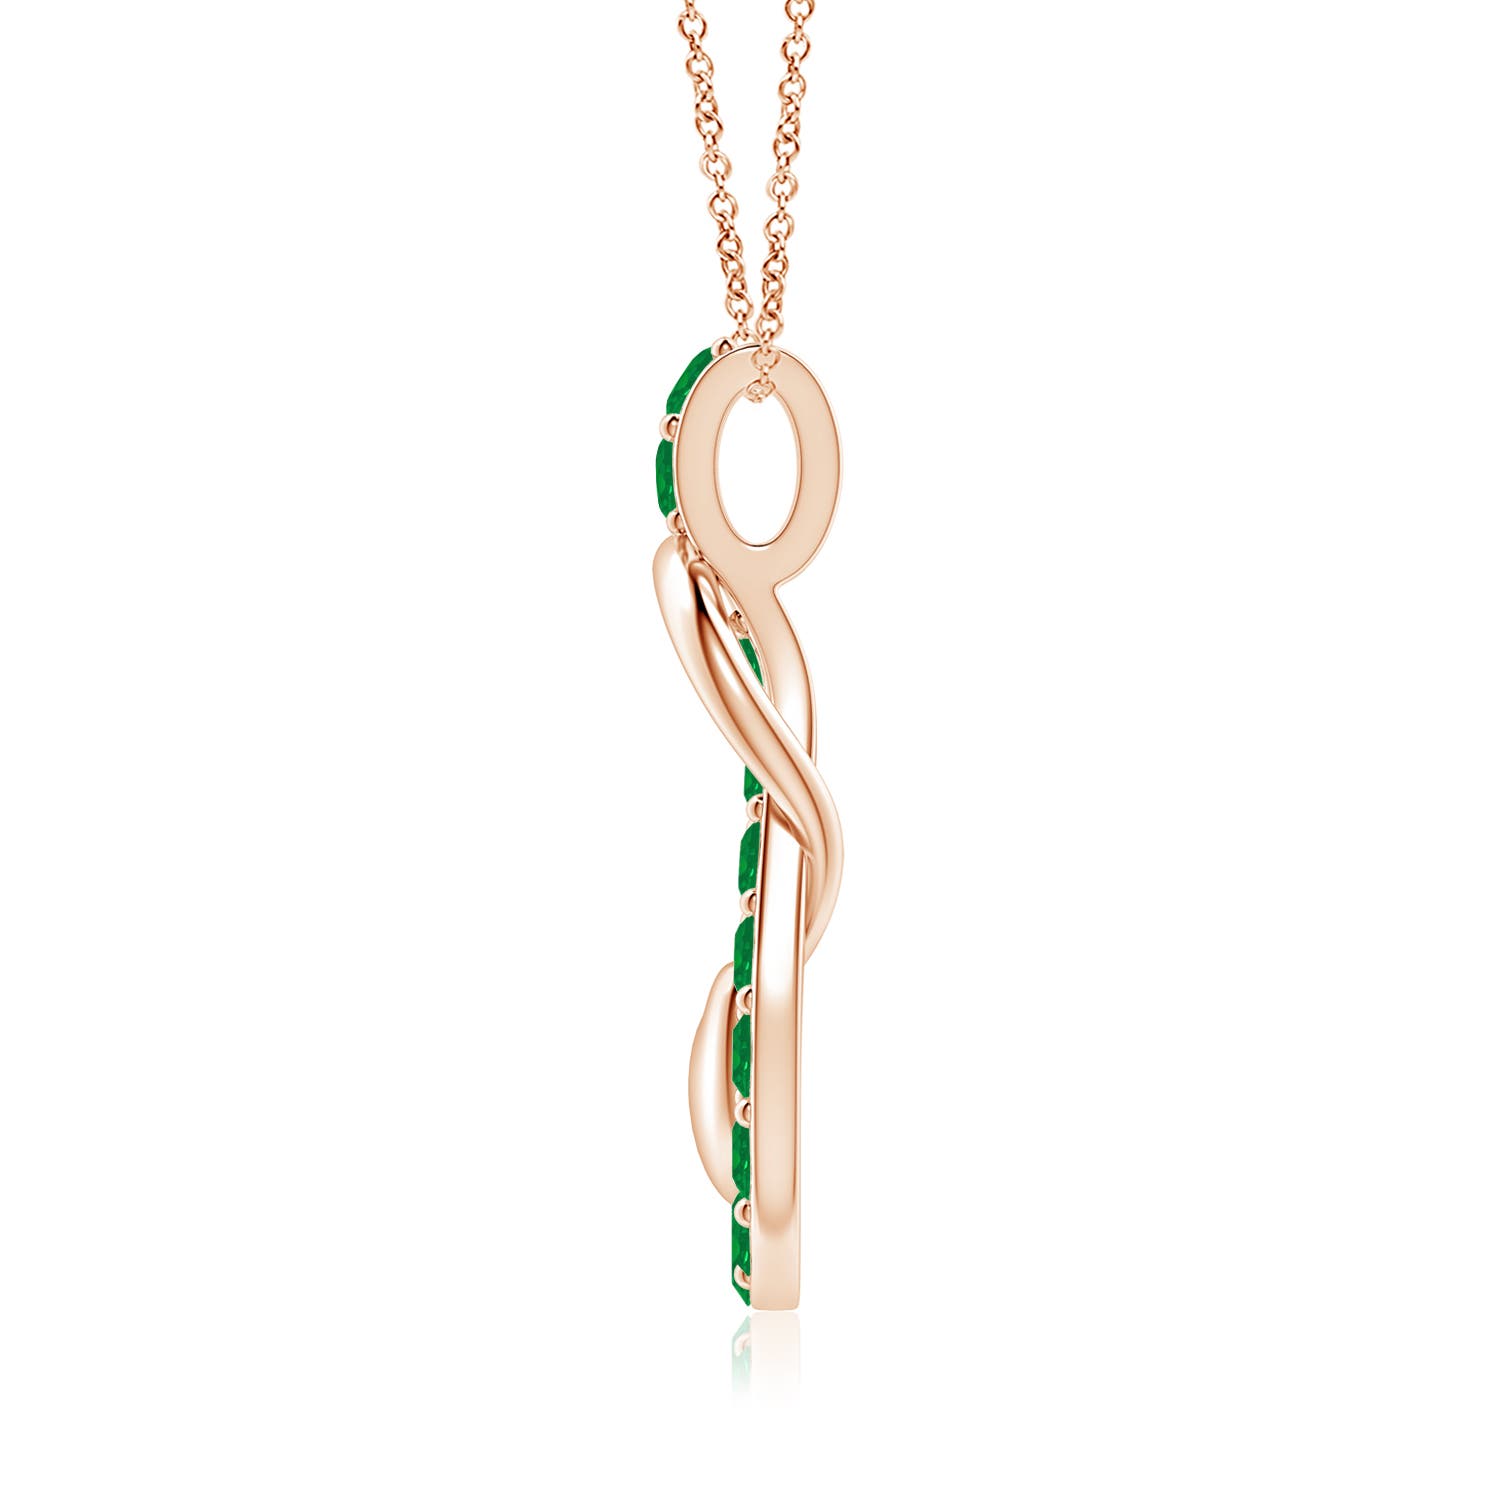 AA - Emerald / 2.85 CT / 18 KT Rose Gold